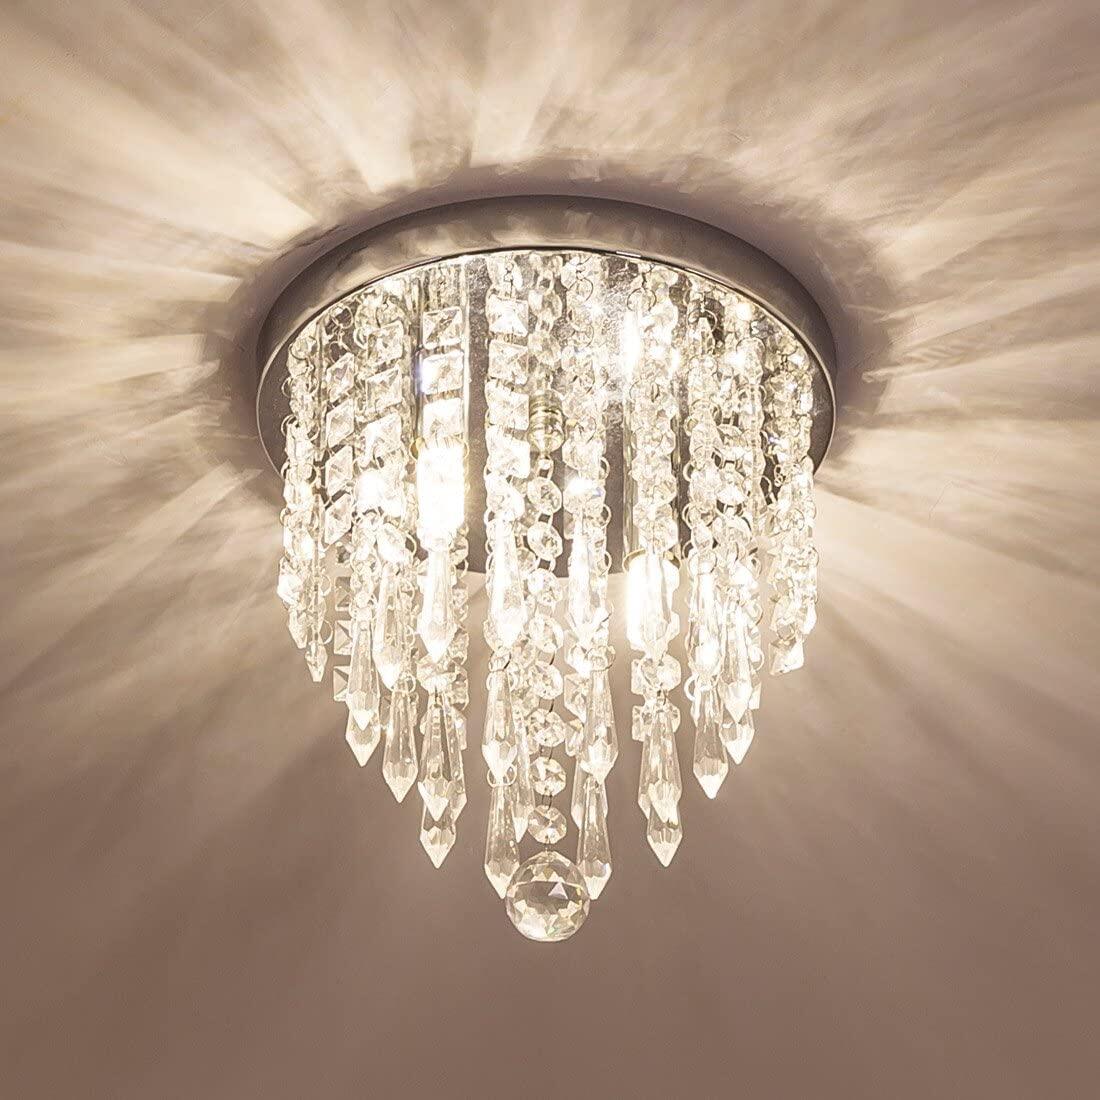 Hot Modern Crystal Chandelier Mini, Small Circle Ceiling Lights